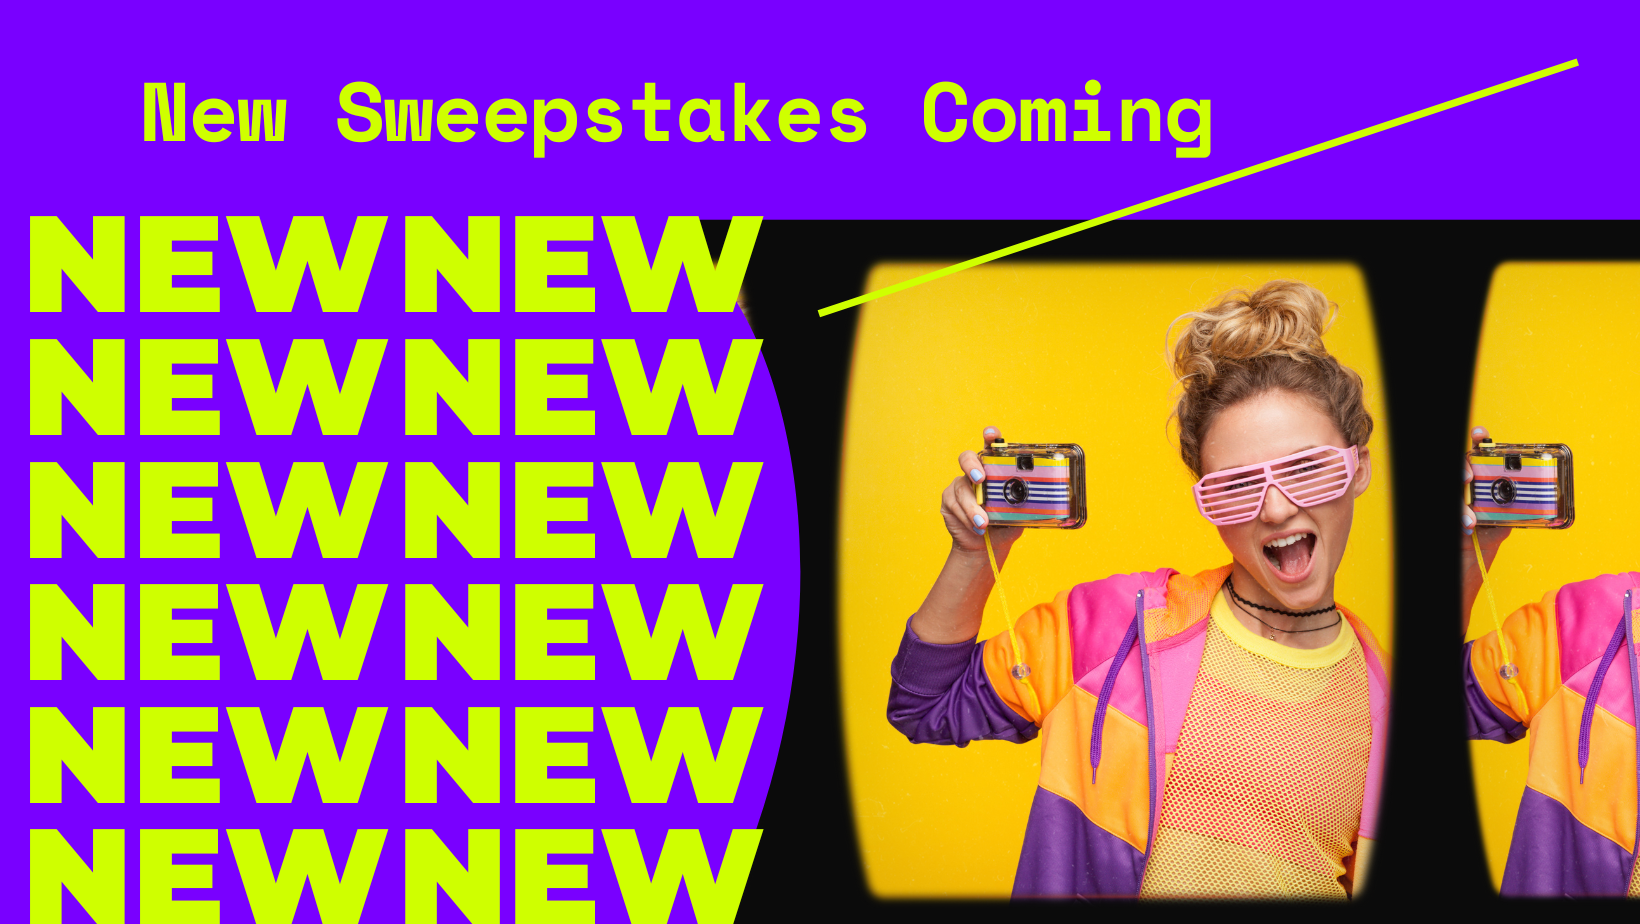 New Sweepstakes coming soon